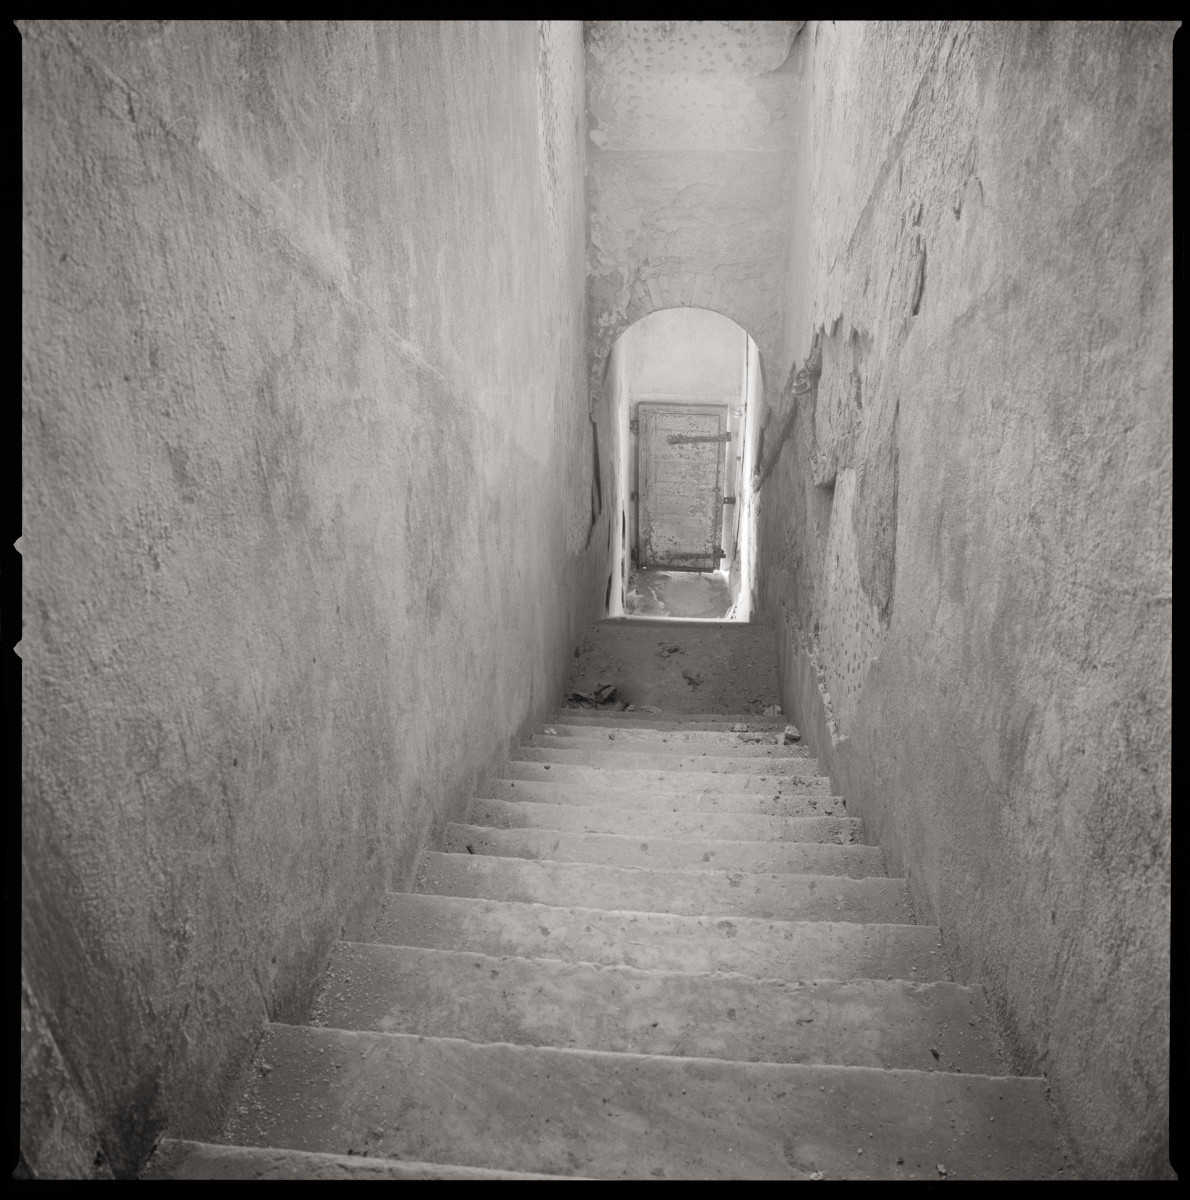 Penitence by Eric T. Kunsman  Image: ID: A black and white image shows a downwards stairway with a door at the very bottom.  The walls and stairs are cement.  